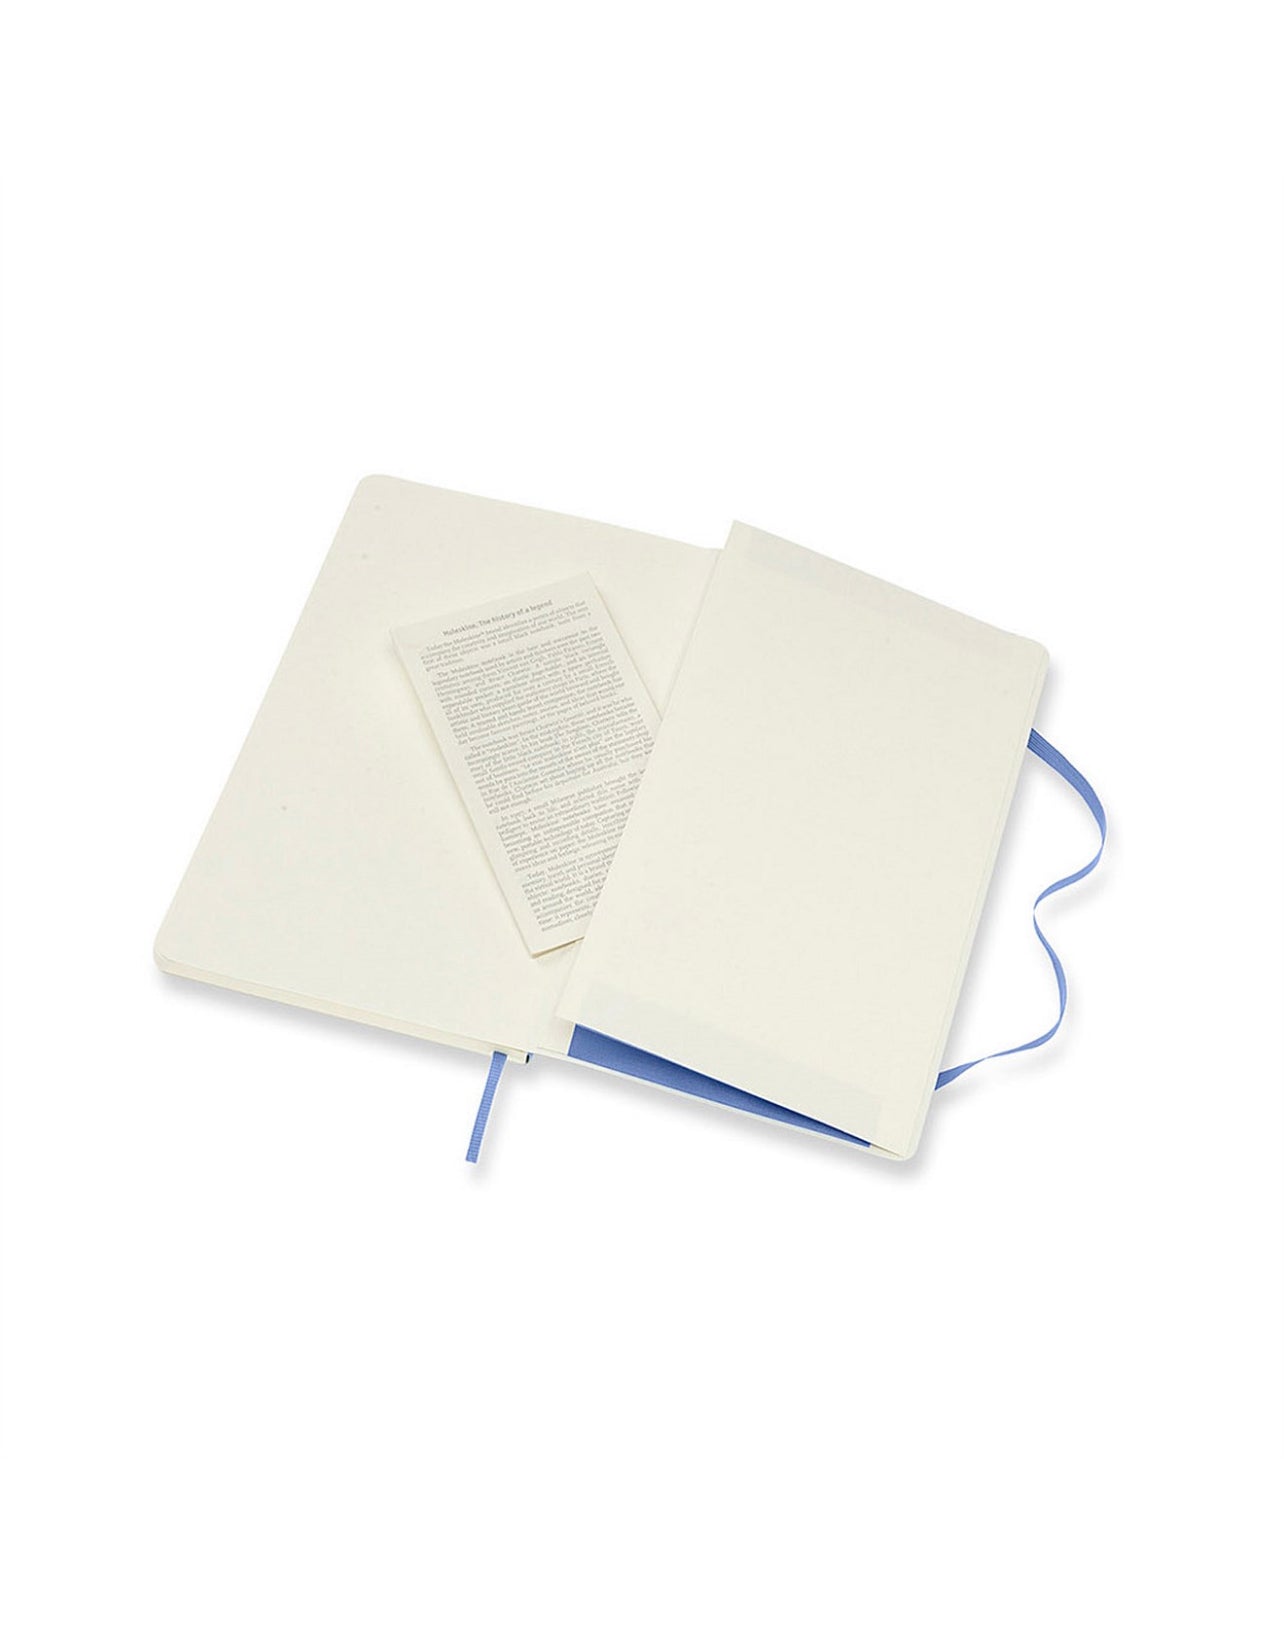 Classic Notebook | Hard Cover | Hydrangea Blue | Extra Large